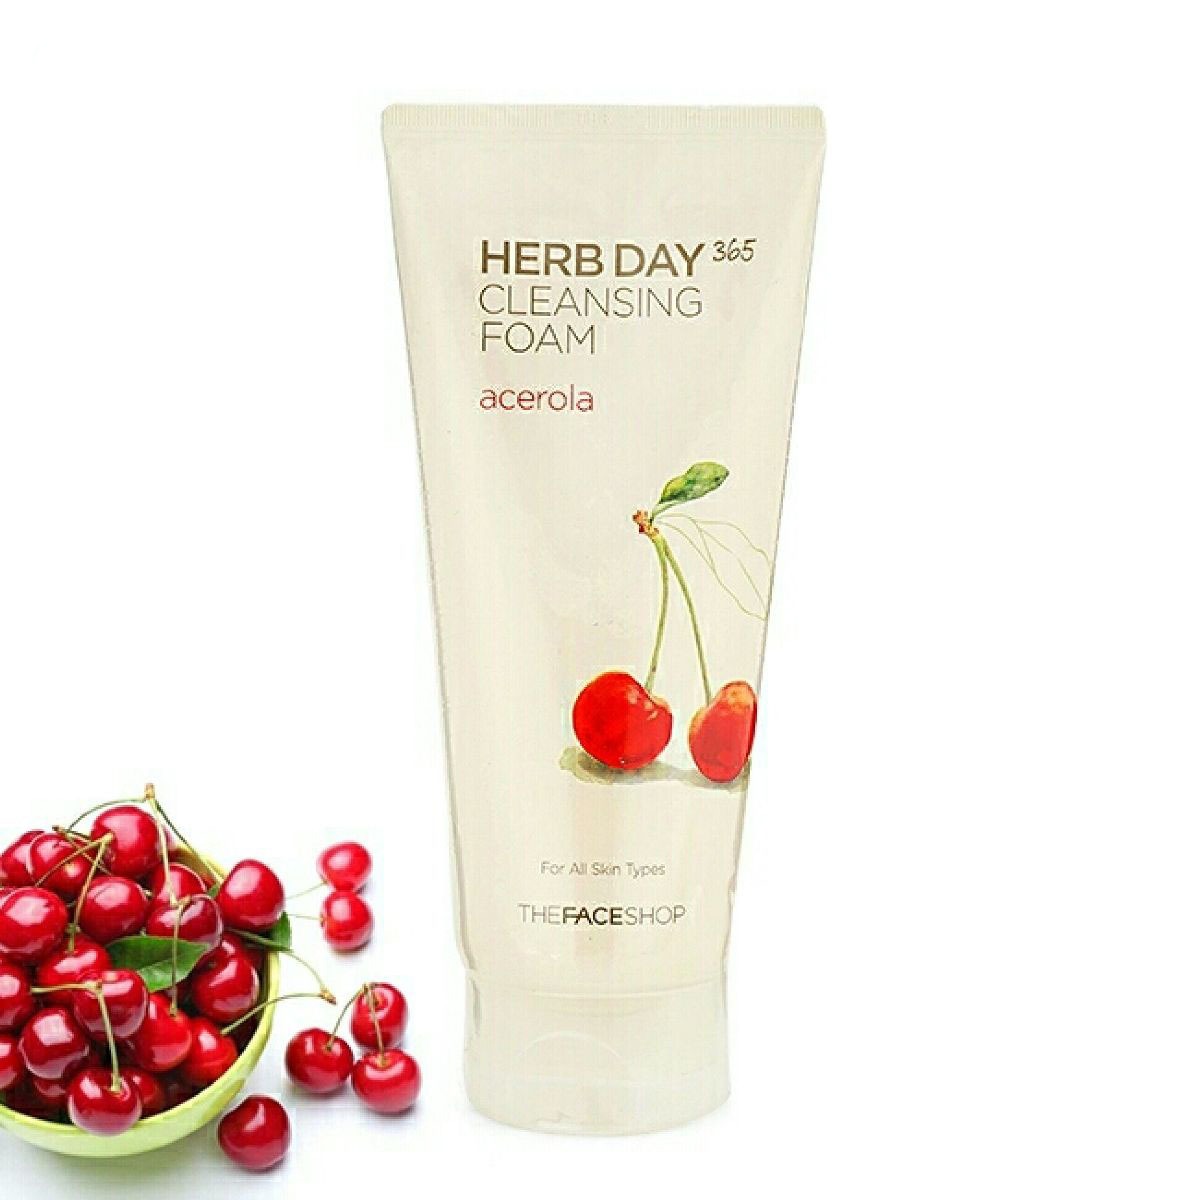 Sữa rửa mặt The Face Shop Herb Day 365 Cleansing Foam Acerola 